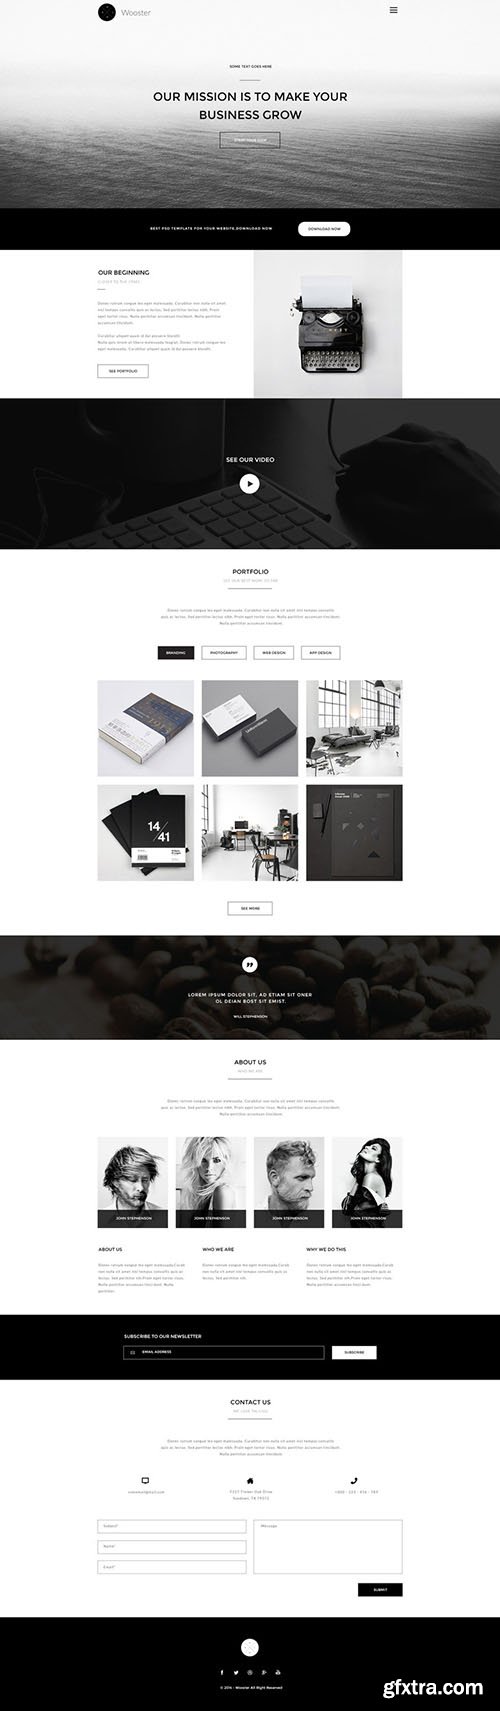 PSD Web Template - Wooster - Vintage Single Page